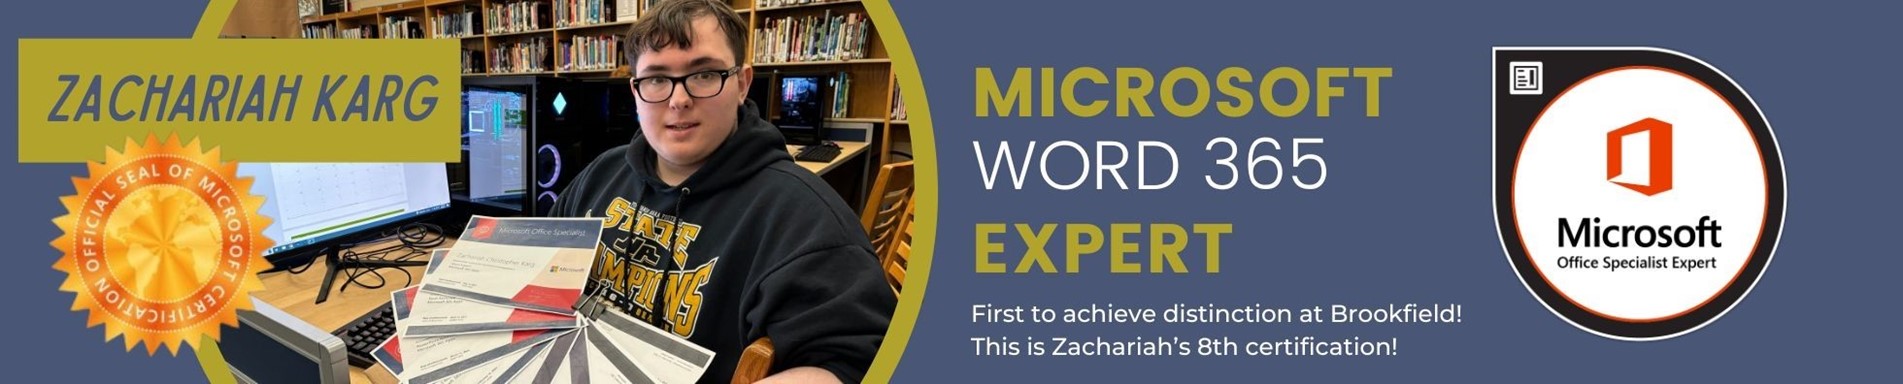 Zachariah Karg is first to receive Microsoft Word 365 expert certification